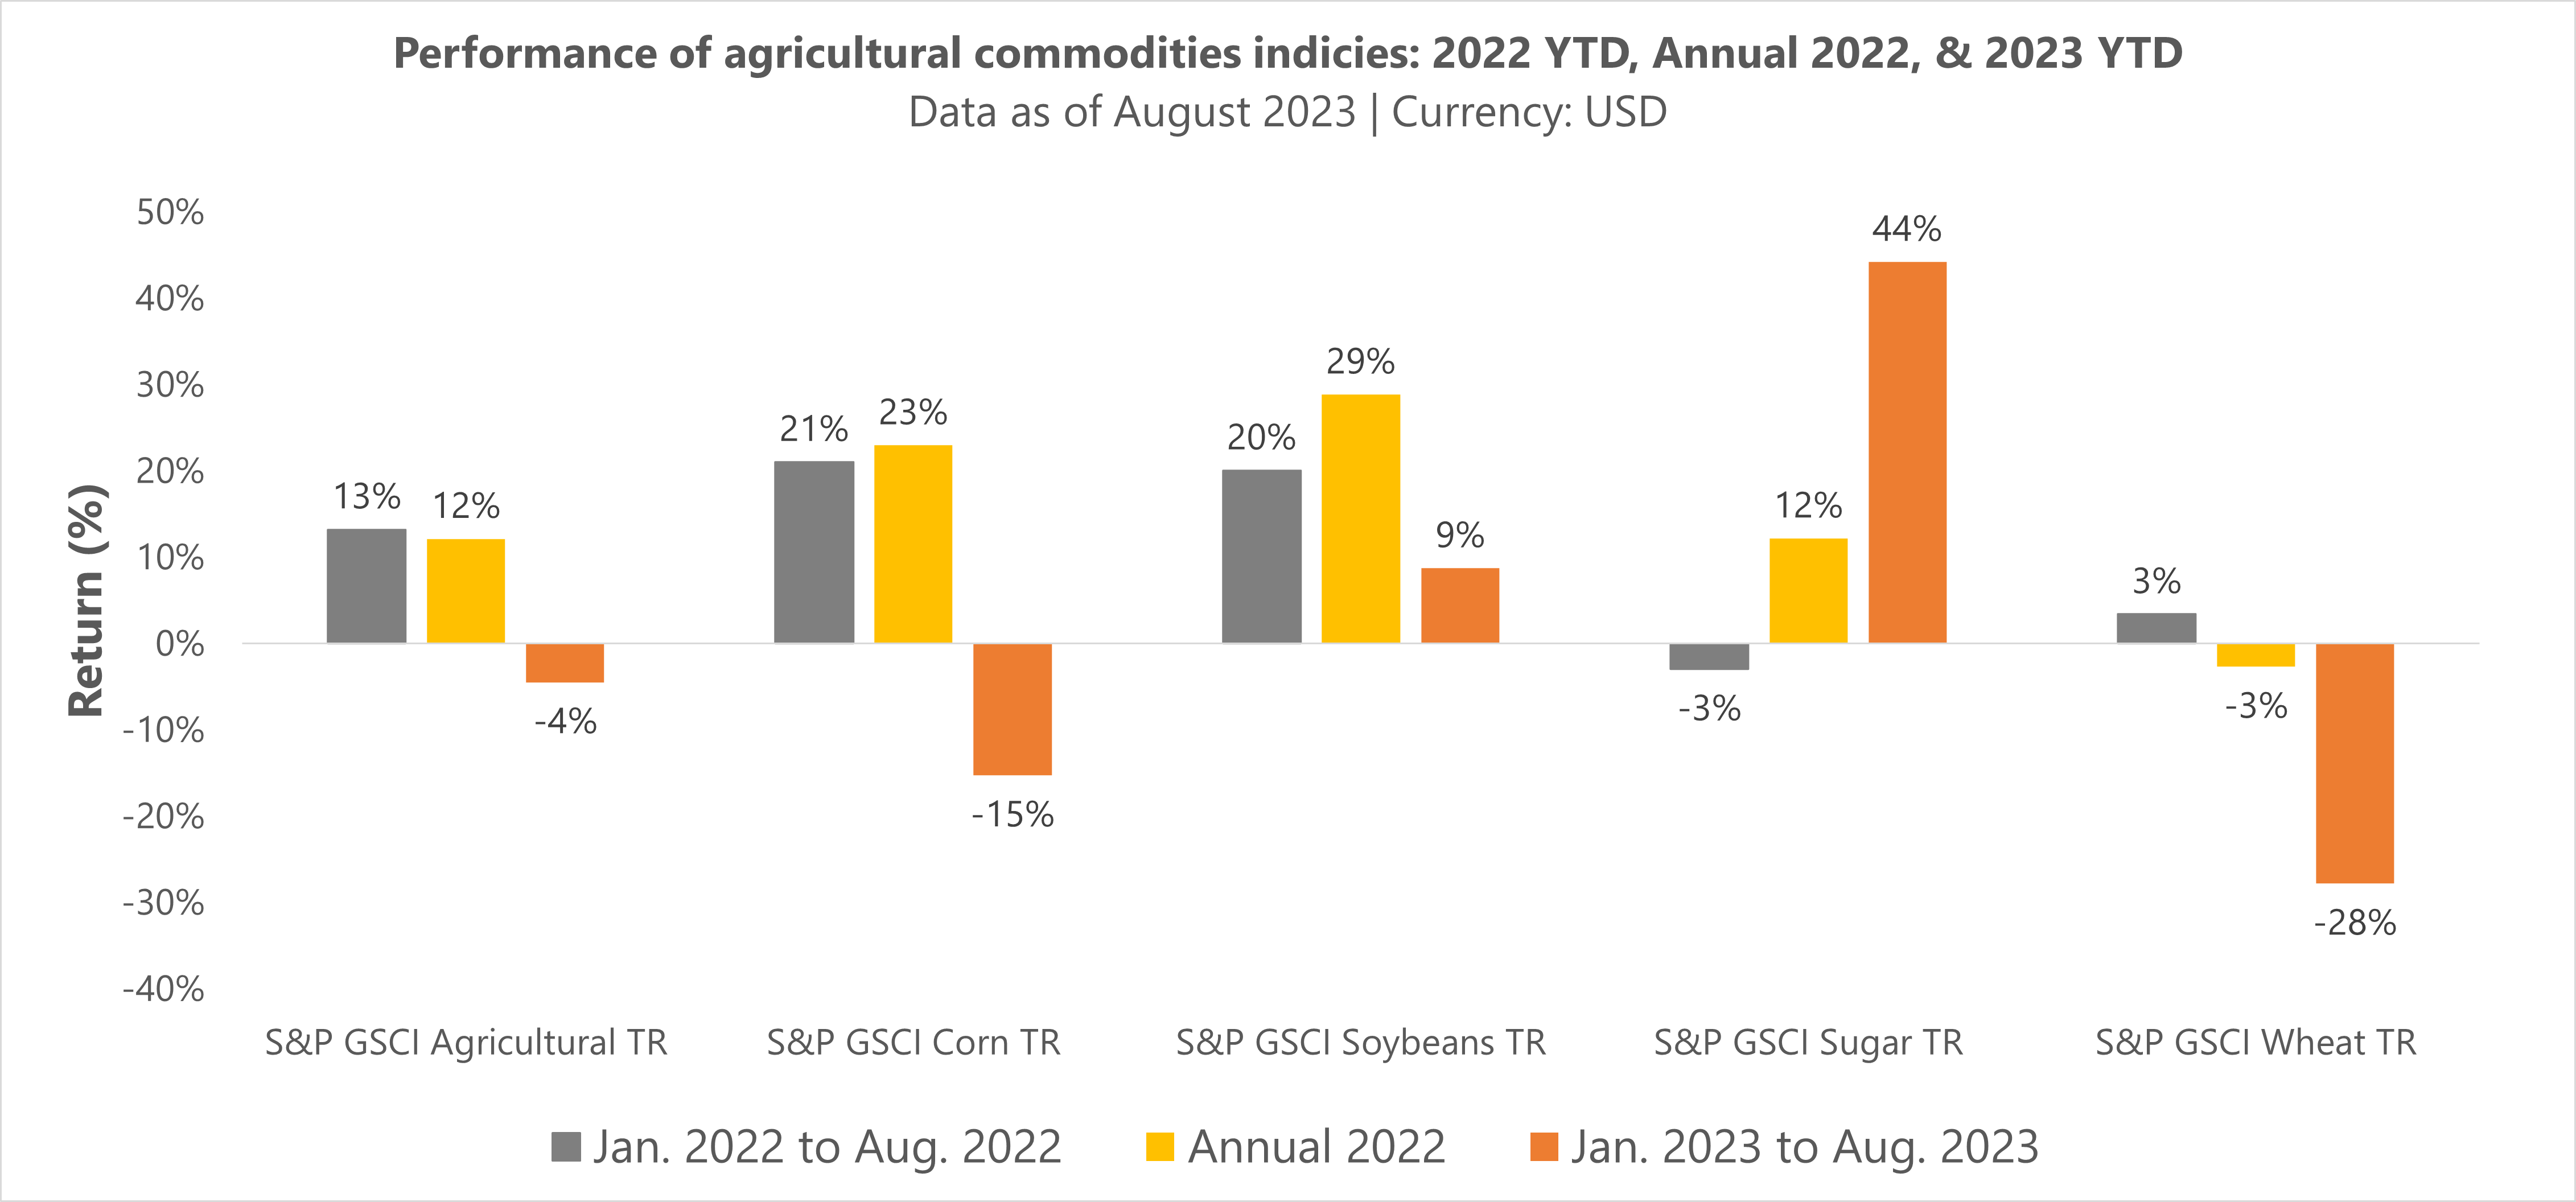 Performance of agricultural commodities indicies